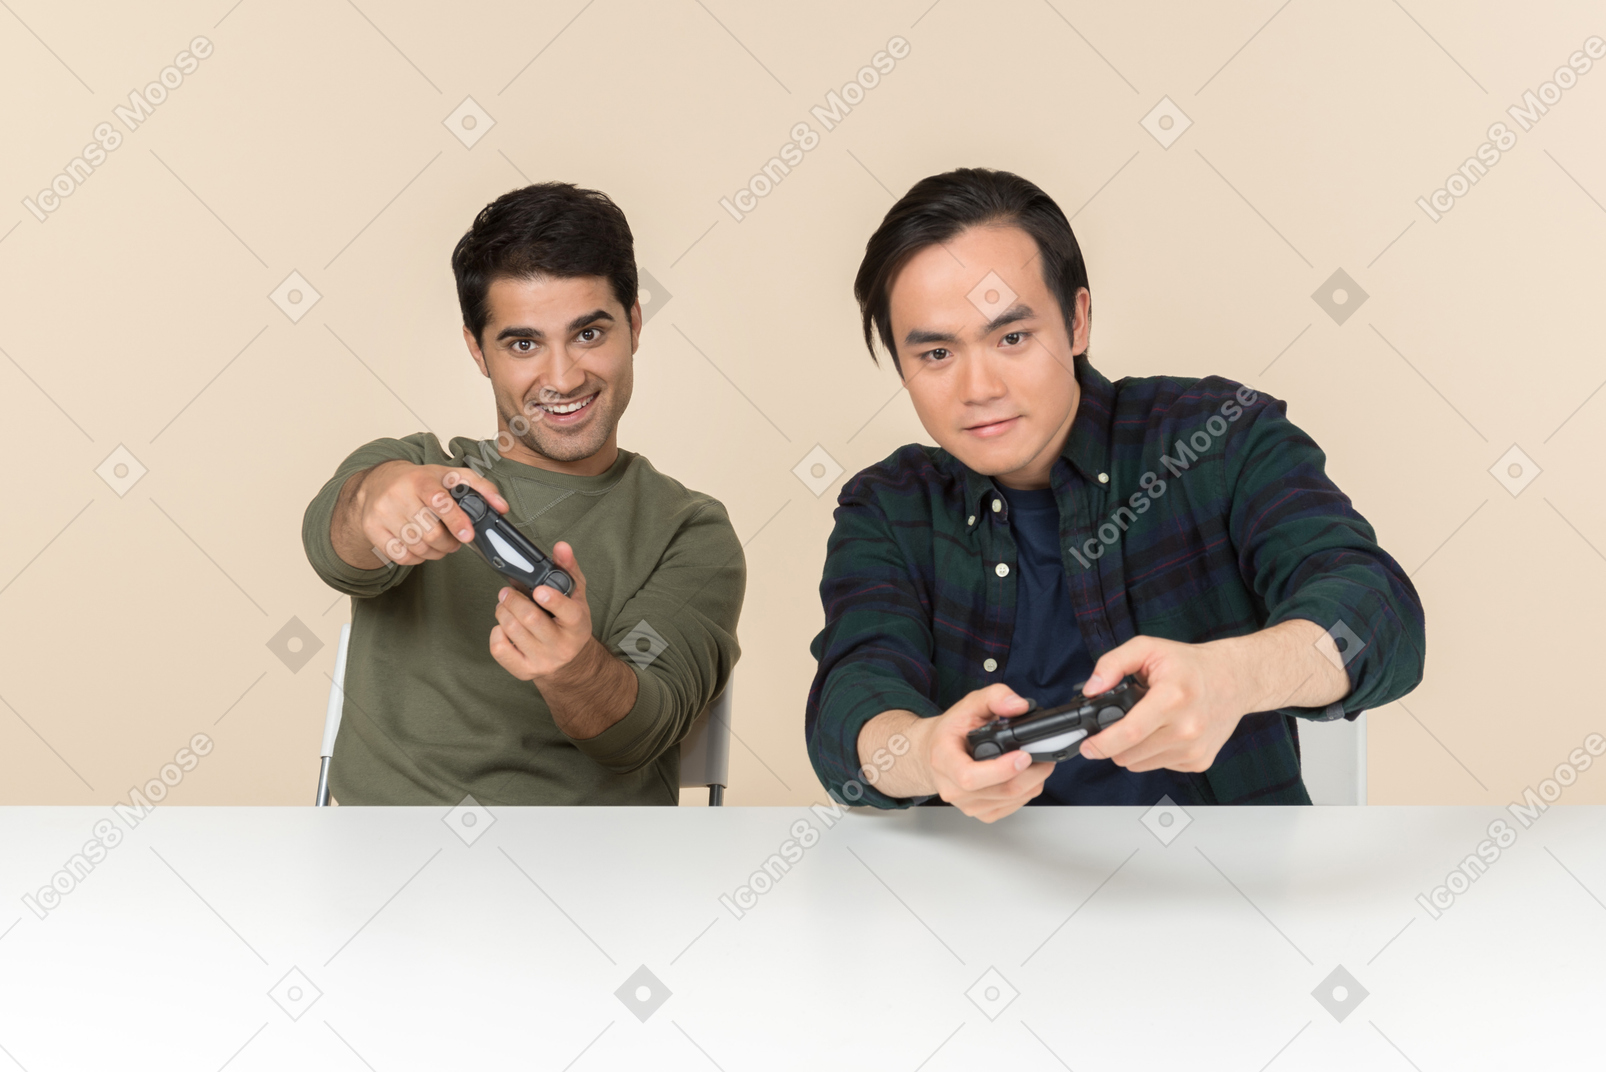 Interracial friends sitting at the table and playing video game